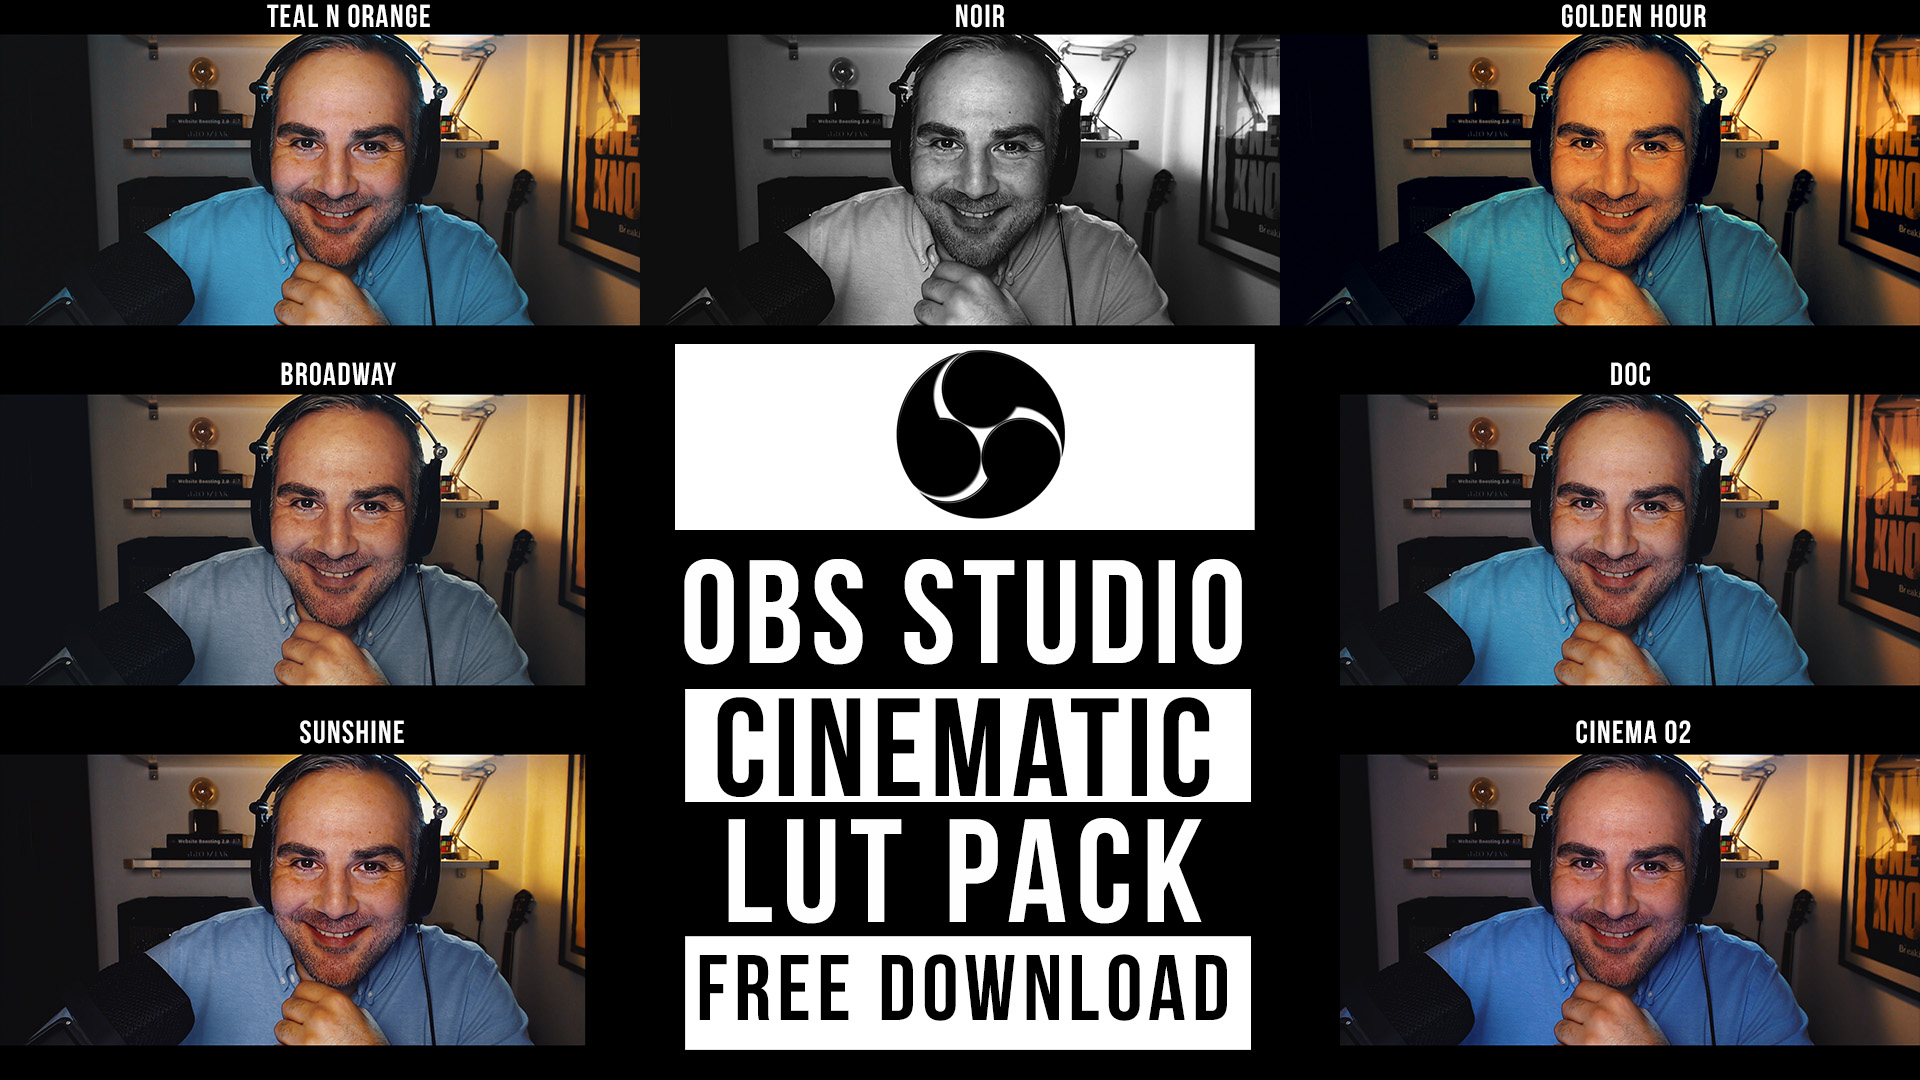 OBS Studio - Cinematic LUT Pack Free Download